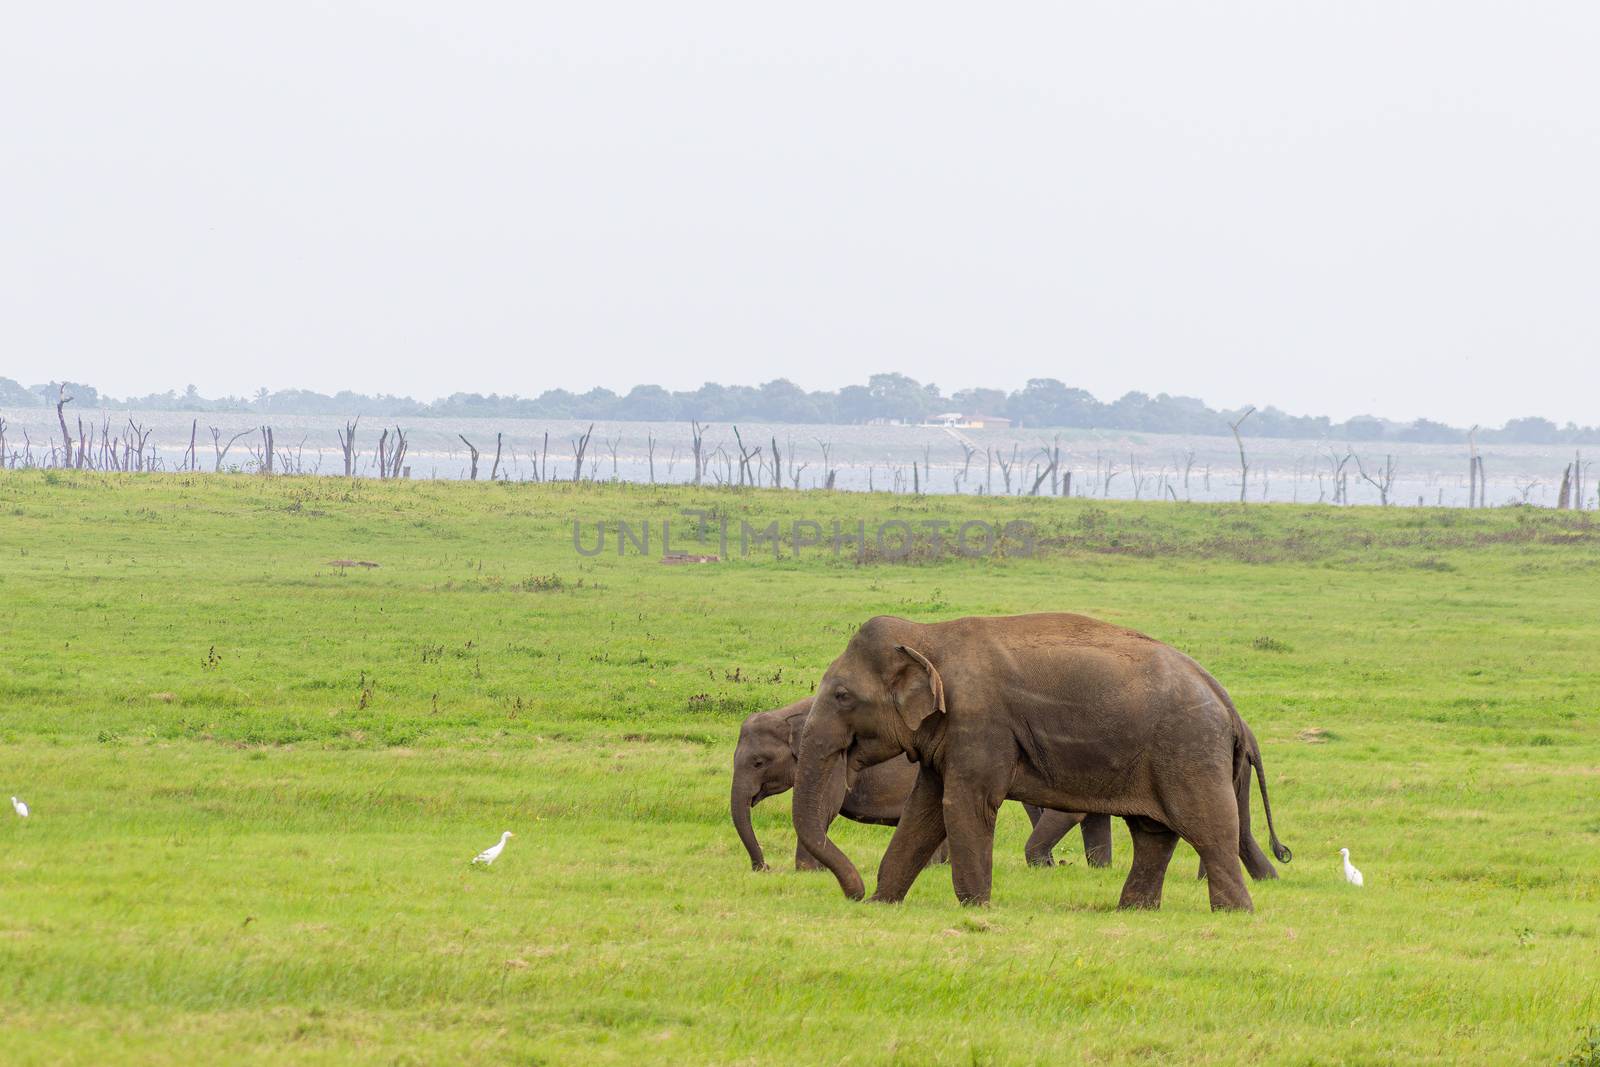 Baby elephant with mother and savanna birds on a green field relaxing. Concept of animal care, travel and wildlife observation.